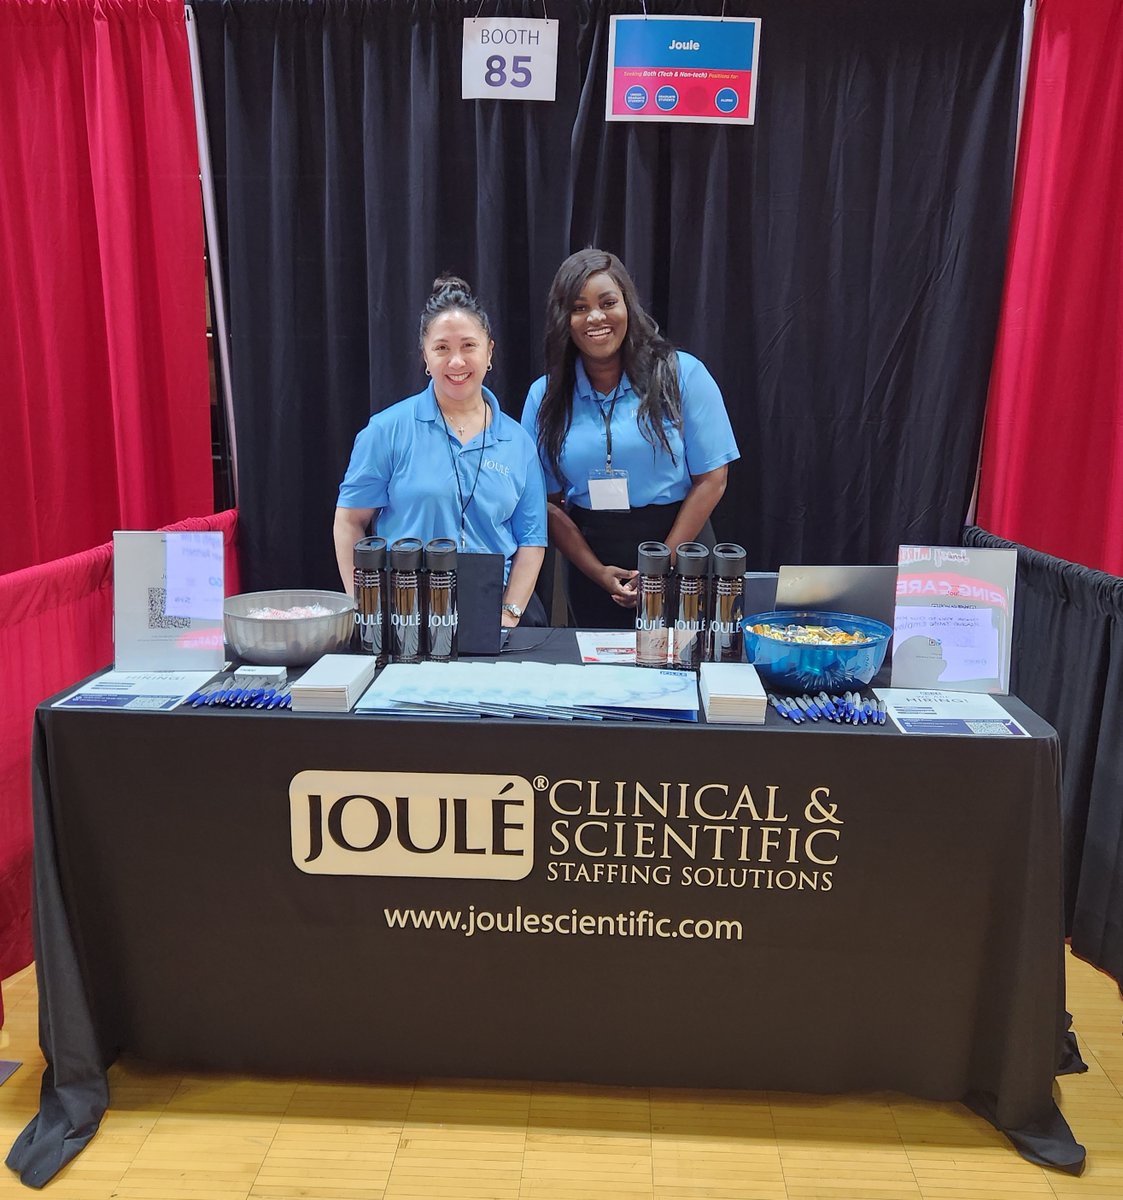 Maria Eliza Dzmil and Catherine Benne, MBA are ready to go at the Rutgers University 2024 Spring Career & Internship Fair! 👋

📍 Stop by Booth 85 to explore exciting opportunities in the life sciences industry. 

#JouleAllDay #careerfair #jobfair #internships